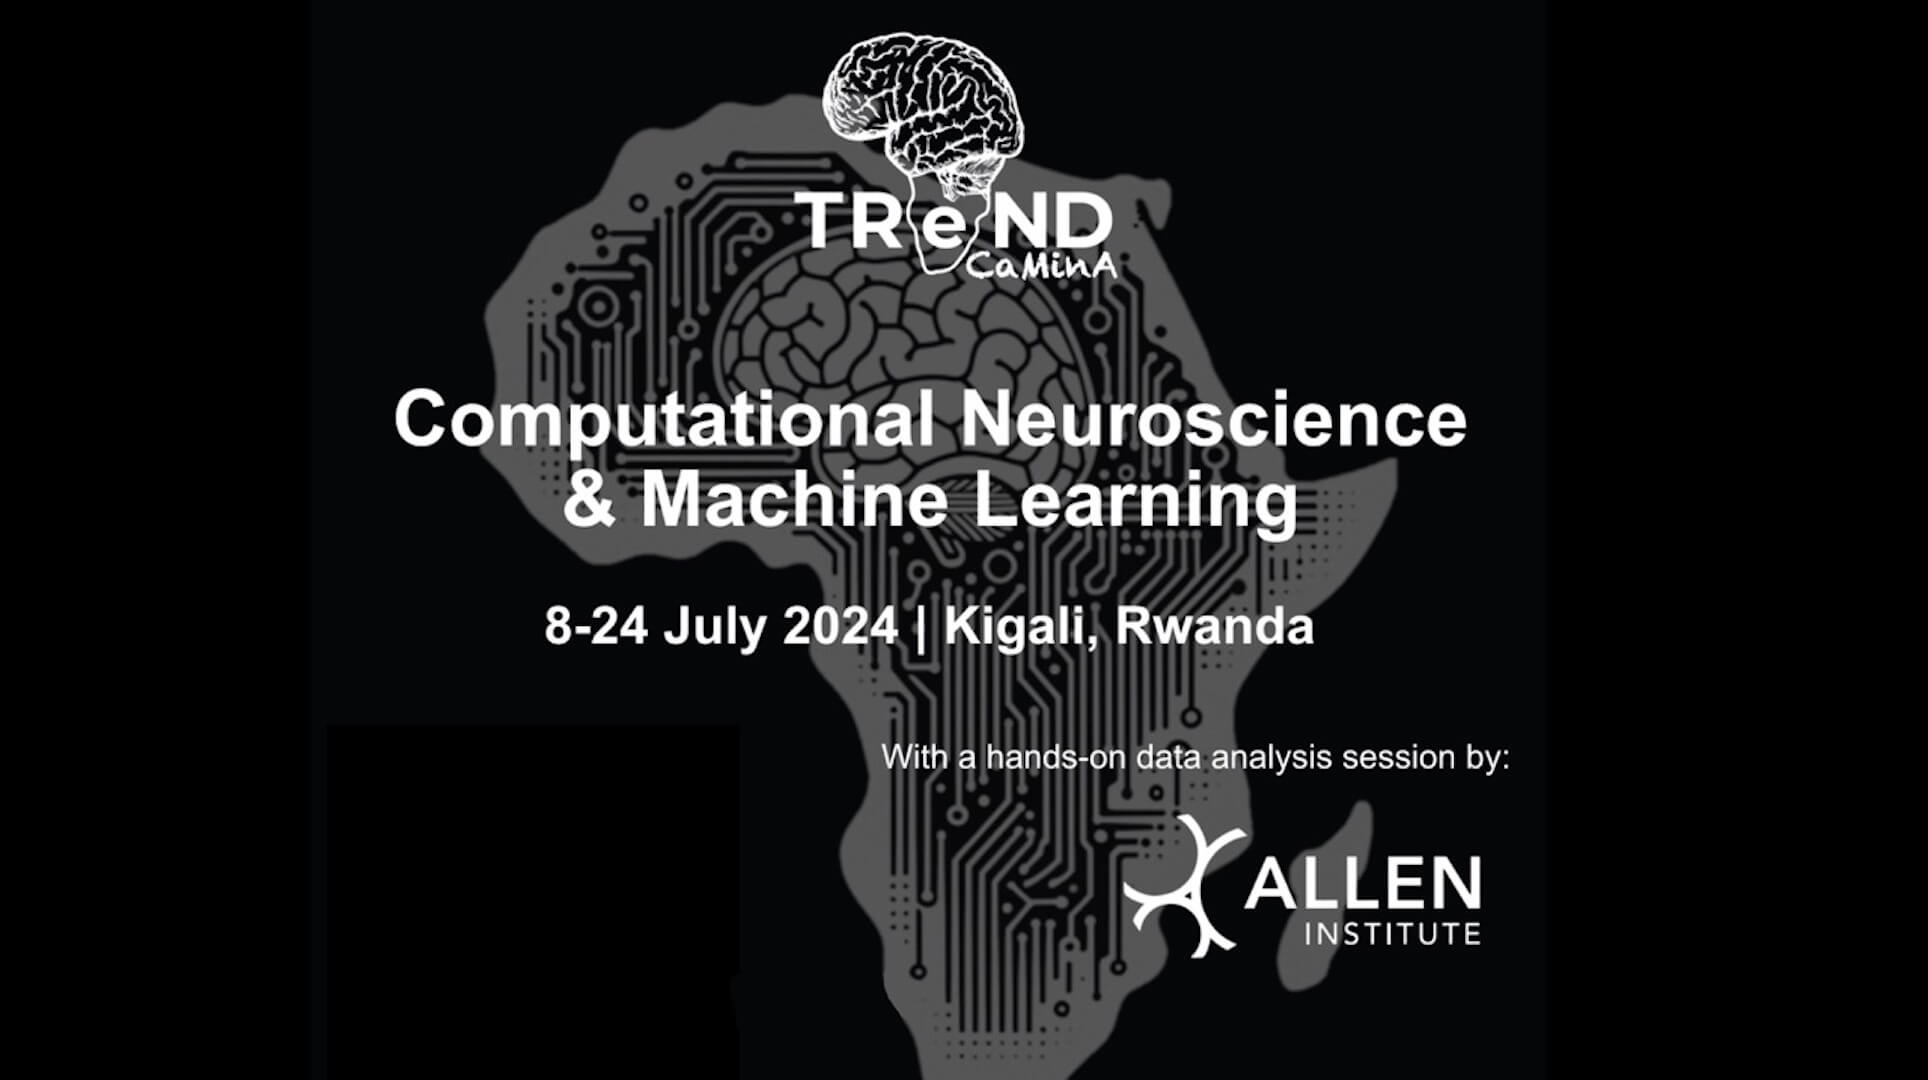 Event promo for TReND-CaMinA: Computational Neuroscience and Machine learning in Africa